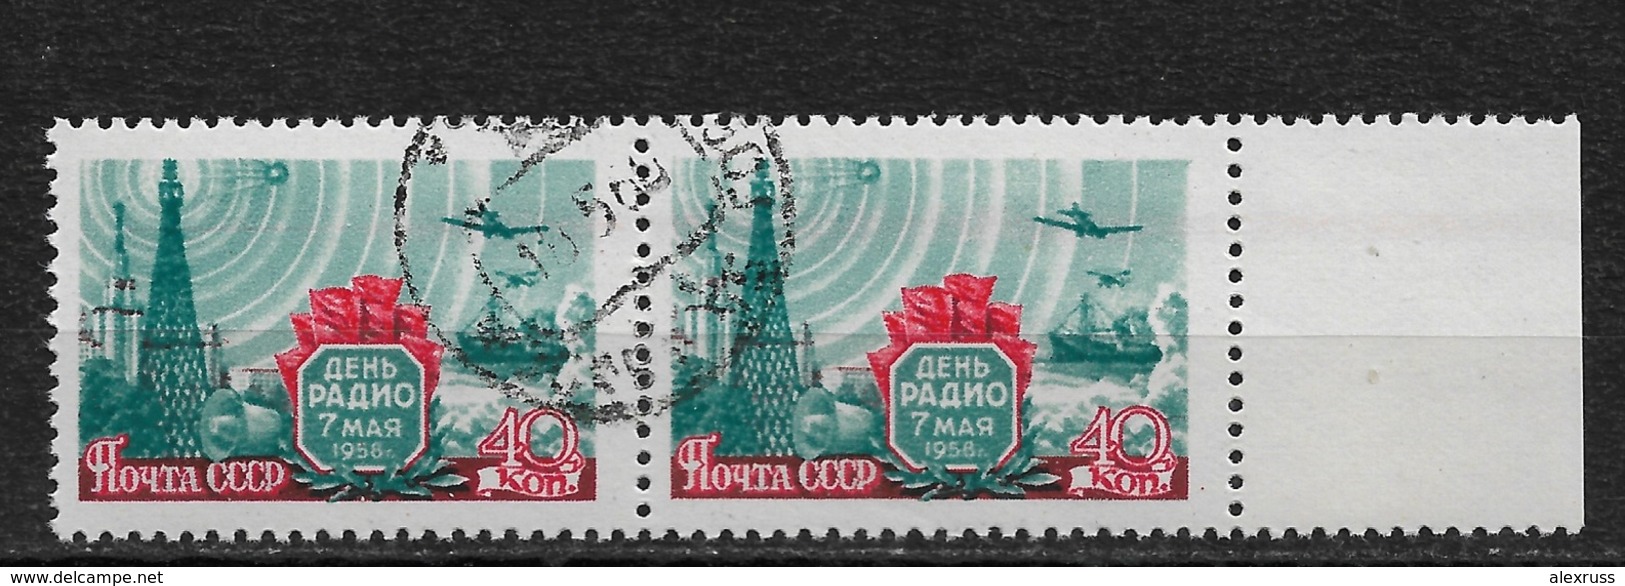 Russia/USSR 1958,Radio Day,Pair Scott 2063,VF CTO NH**OG (L-1) - Unused Stamps